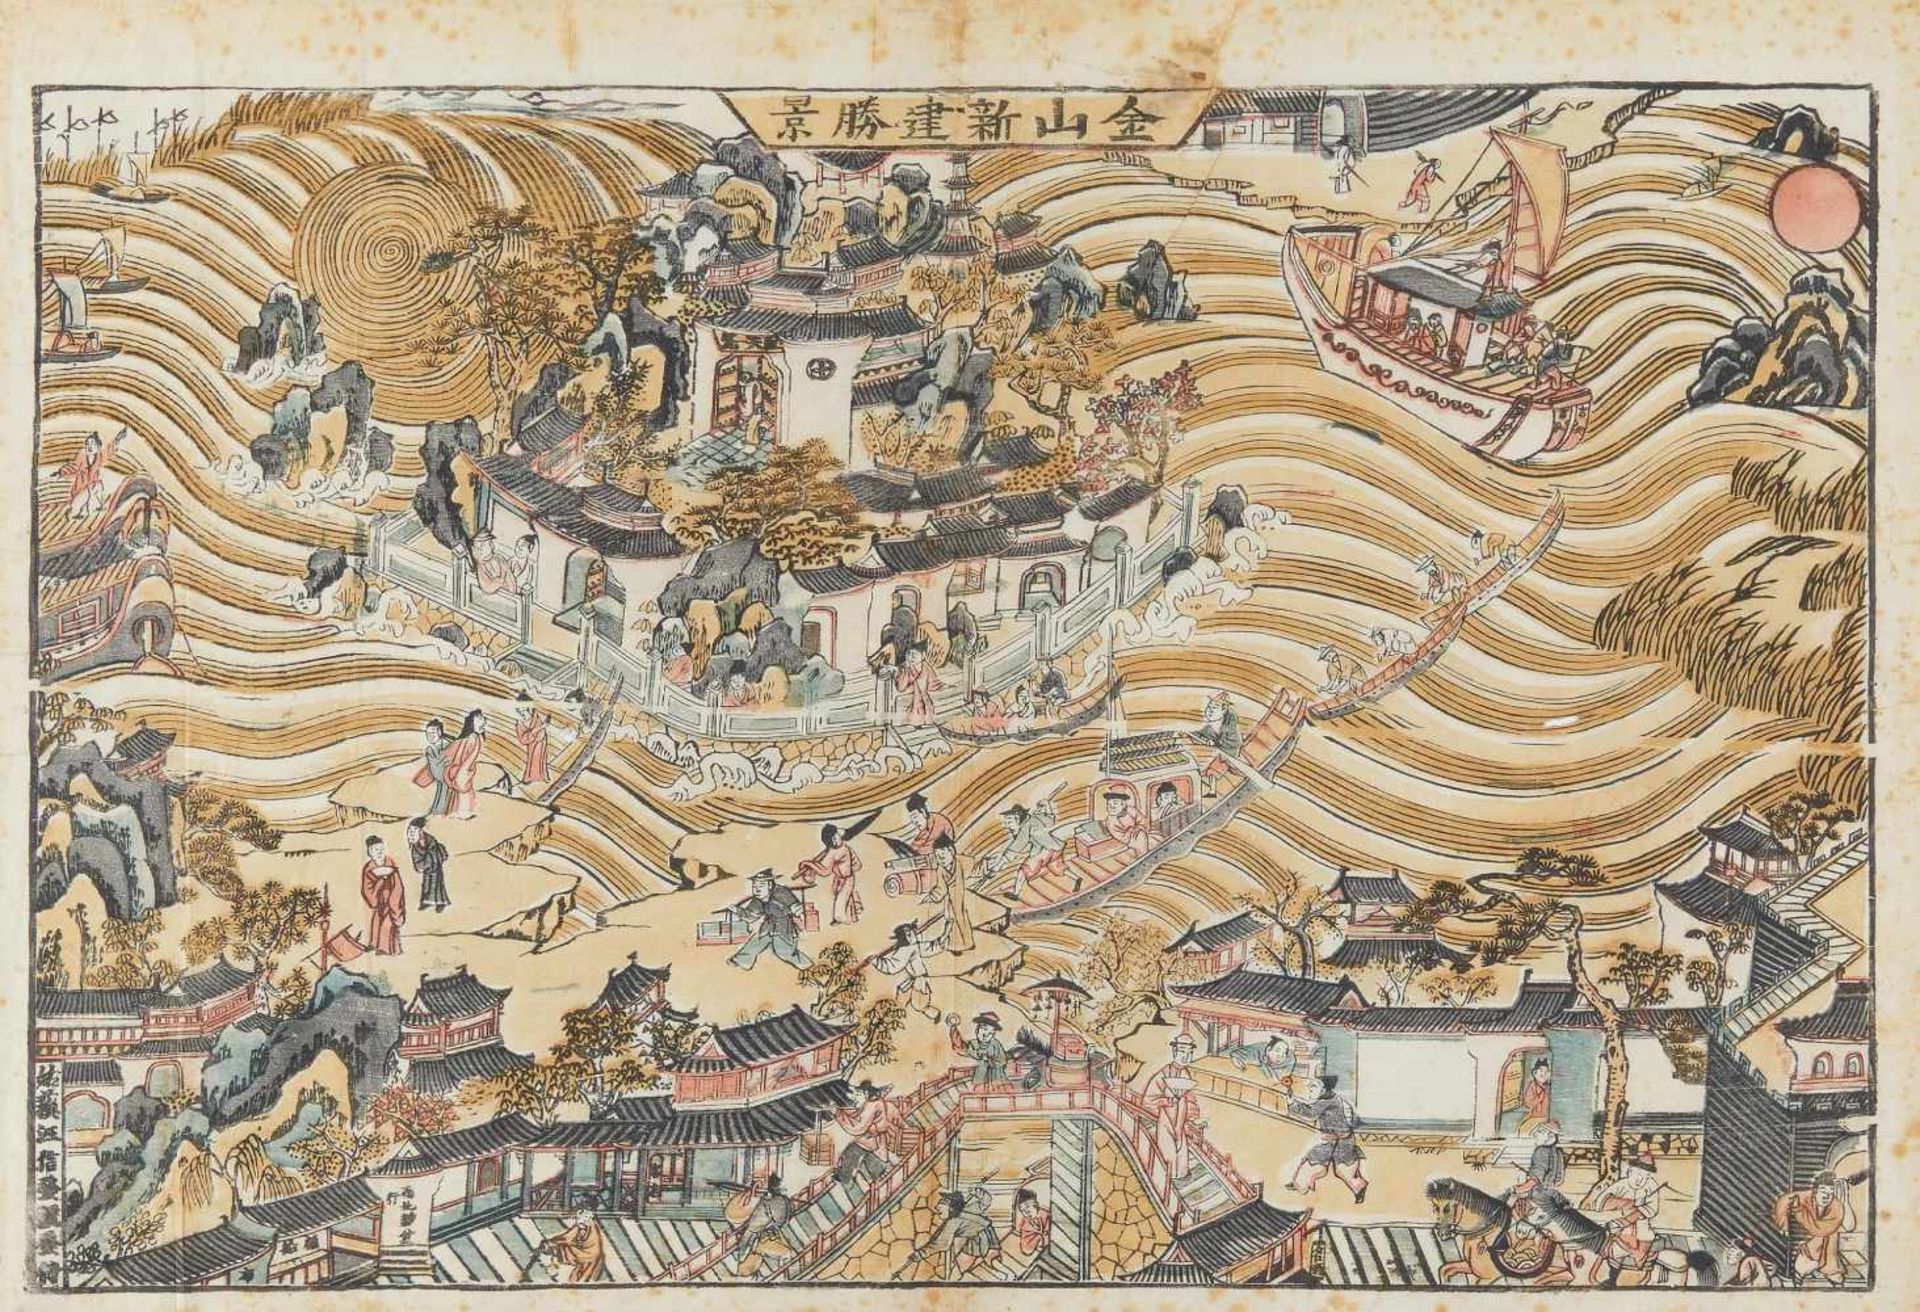 RARE PRINT WITH THE SIGHT OF JINSHAN. China. Qing dynasty. 17th/18th c. Title: New sight of